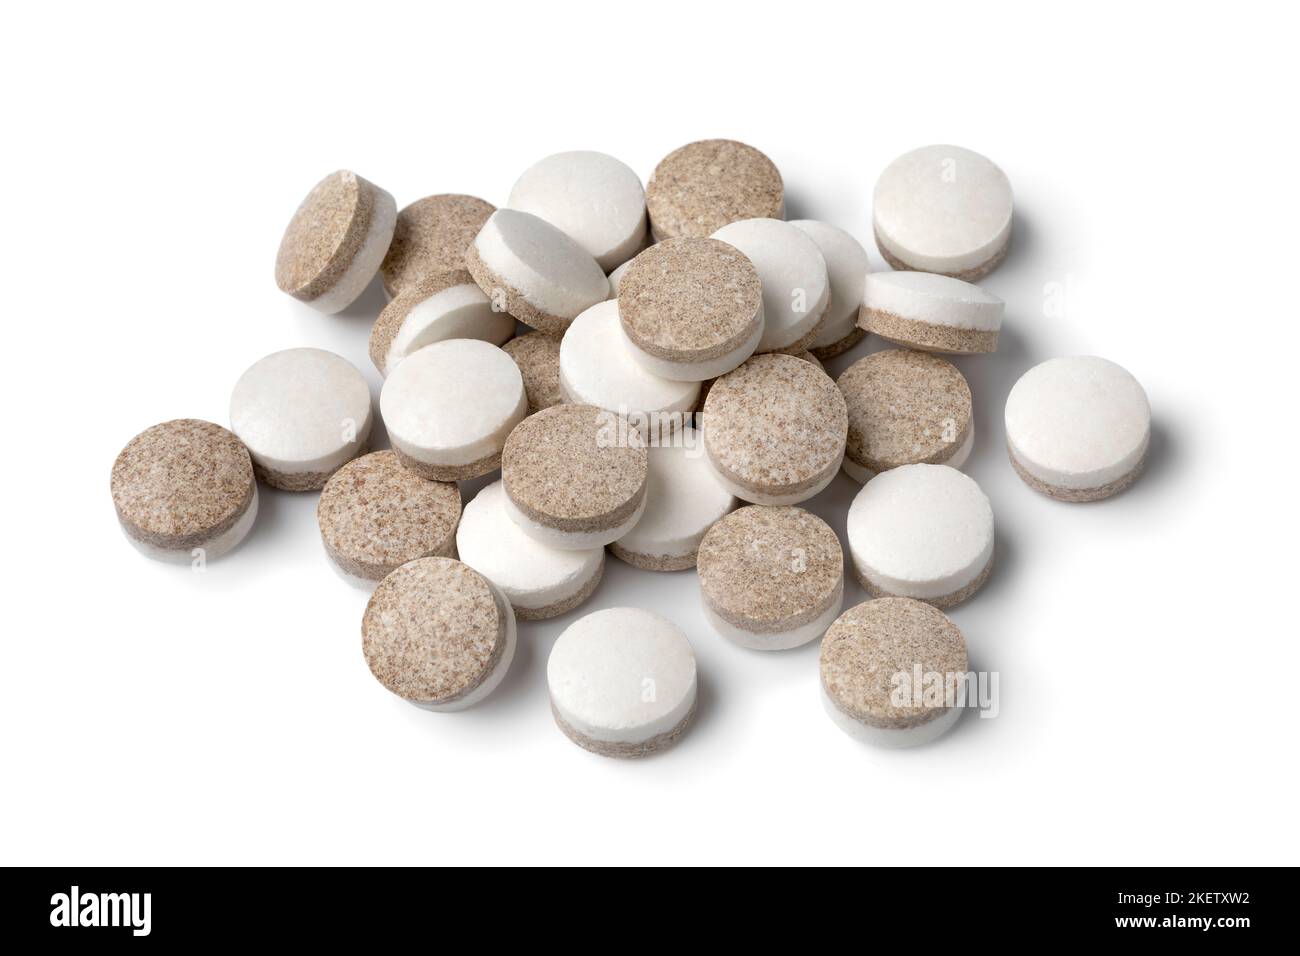 Heap of Dutch black and white liquorice pastilles close up isolated on white background Stock Photo